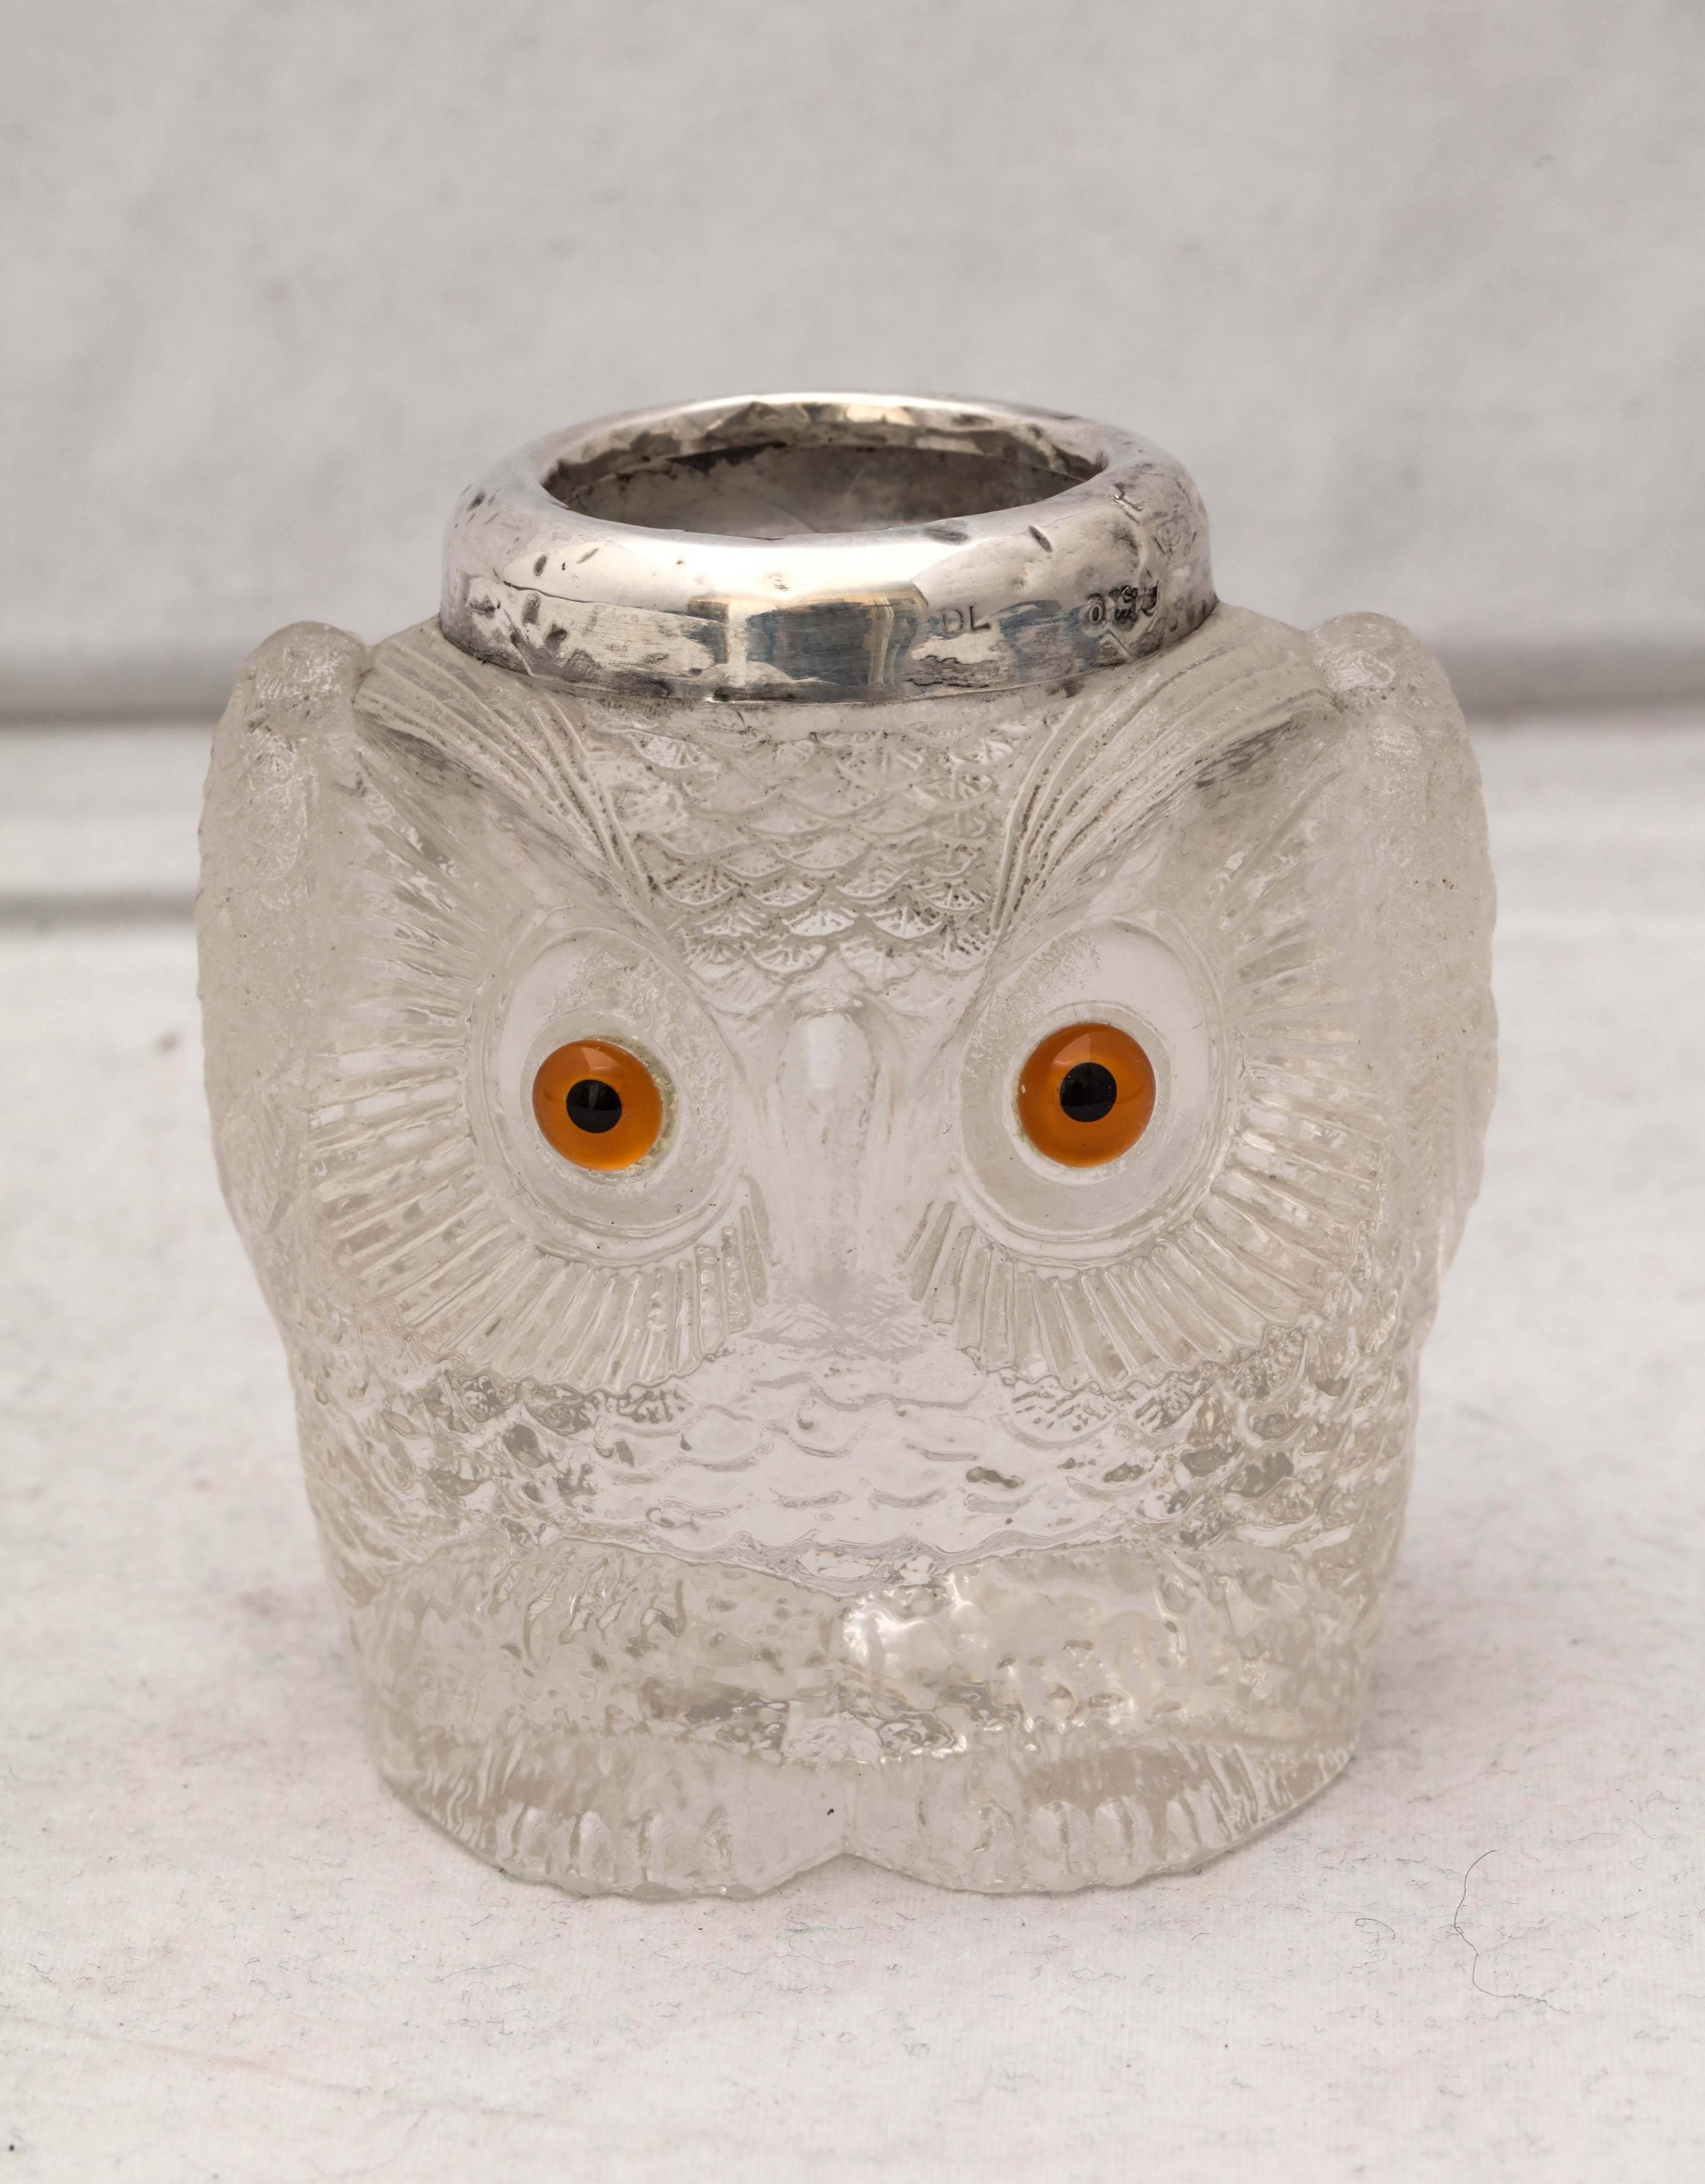 Rare and unusual, Edwardian, sterling silver-mounted owl-form crystal match striker (with glass eyes), London, 1909, David Loebl - maker. Measures: 3